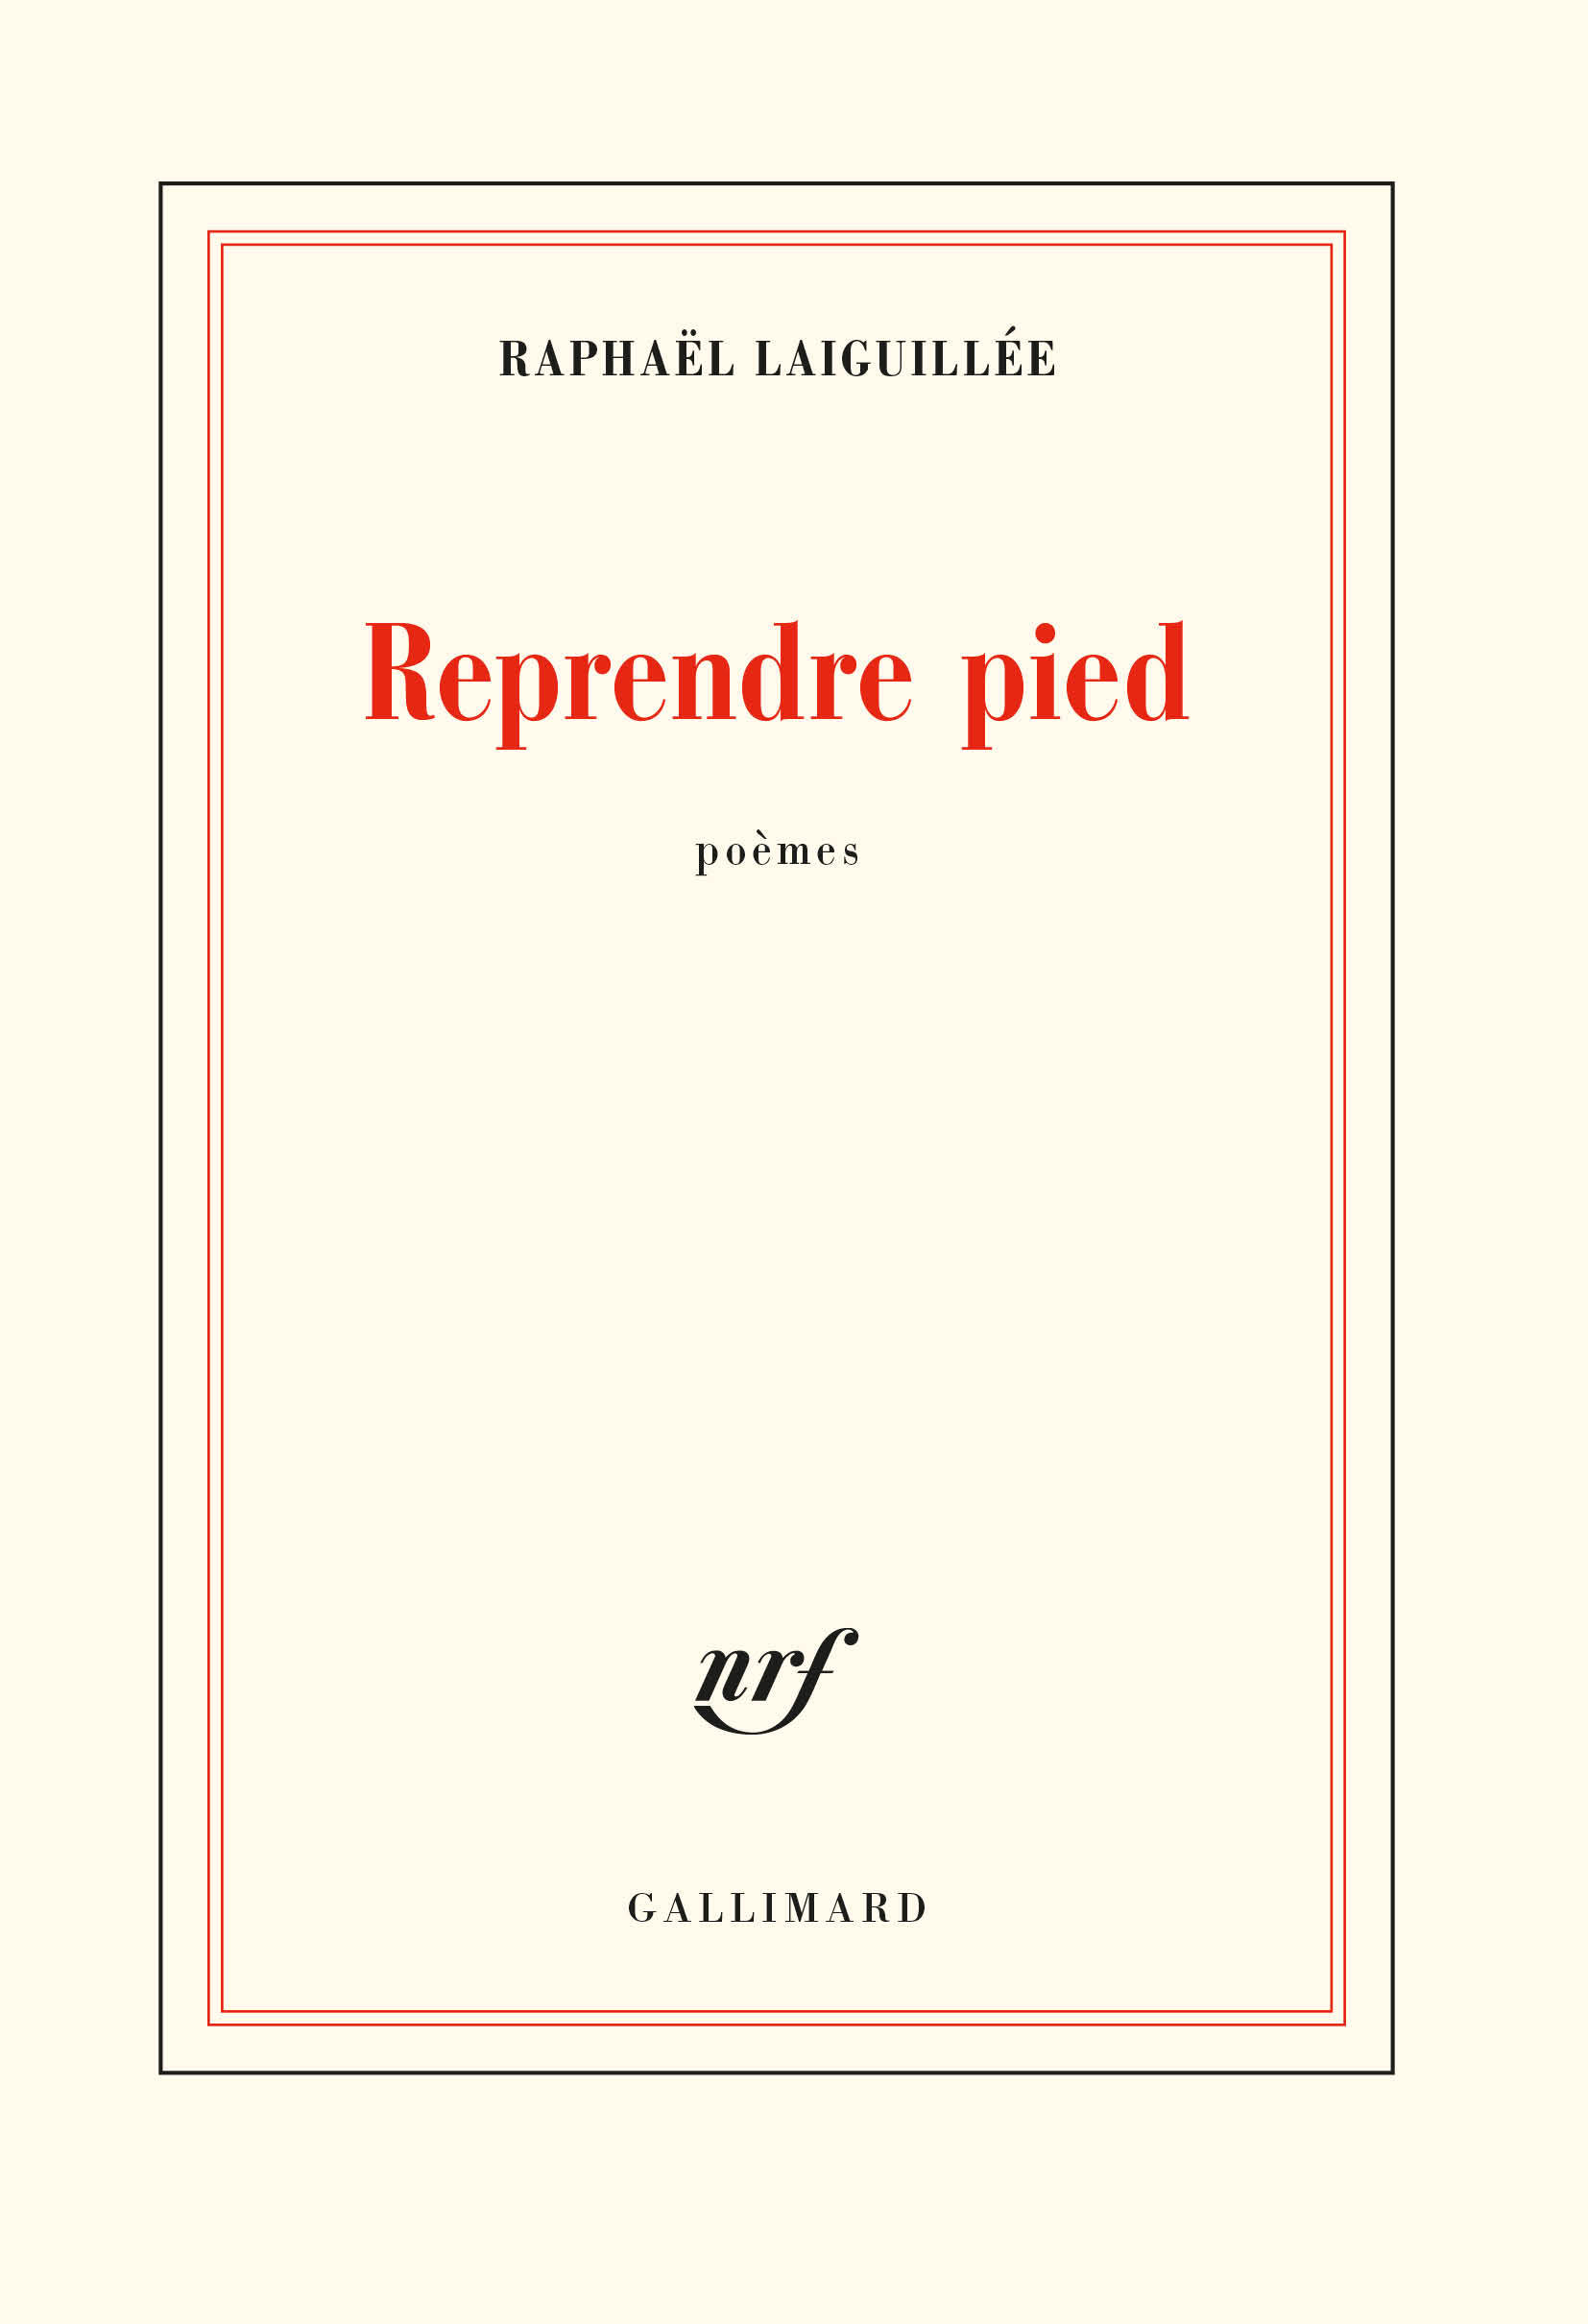 Reprendre pied (9782072876295-front-cover)